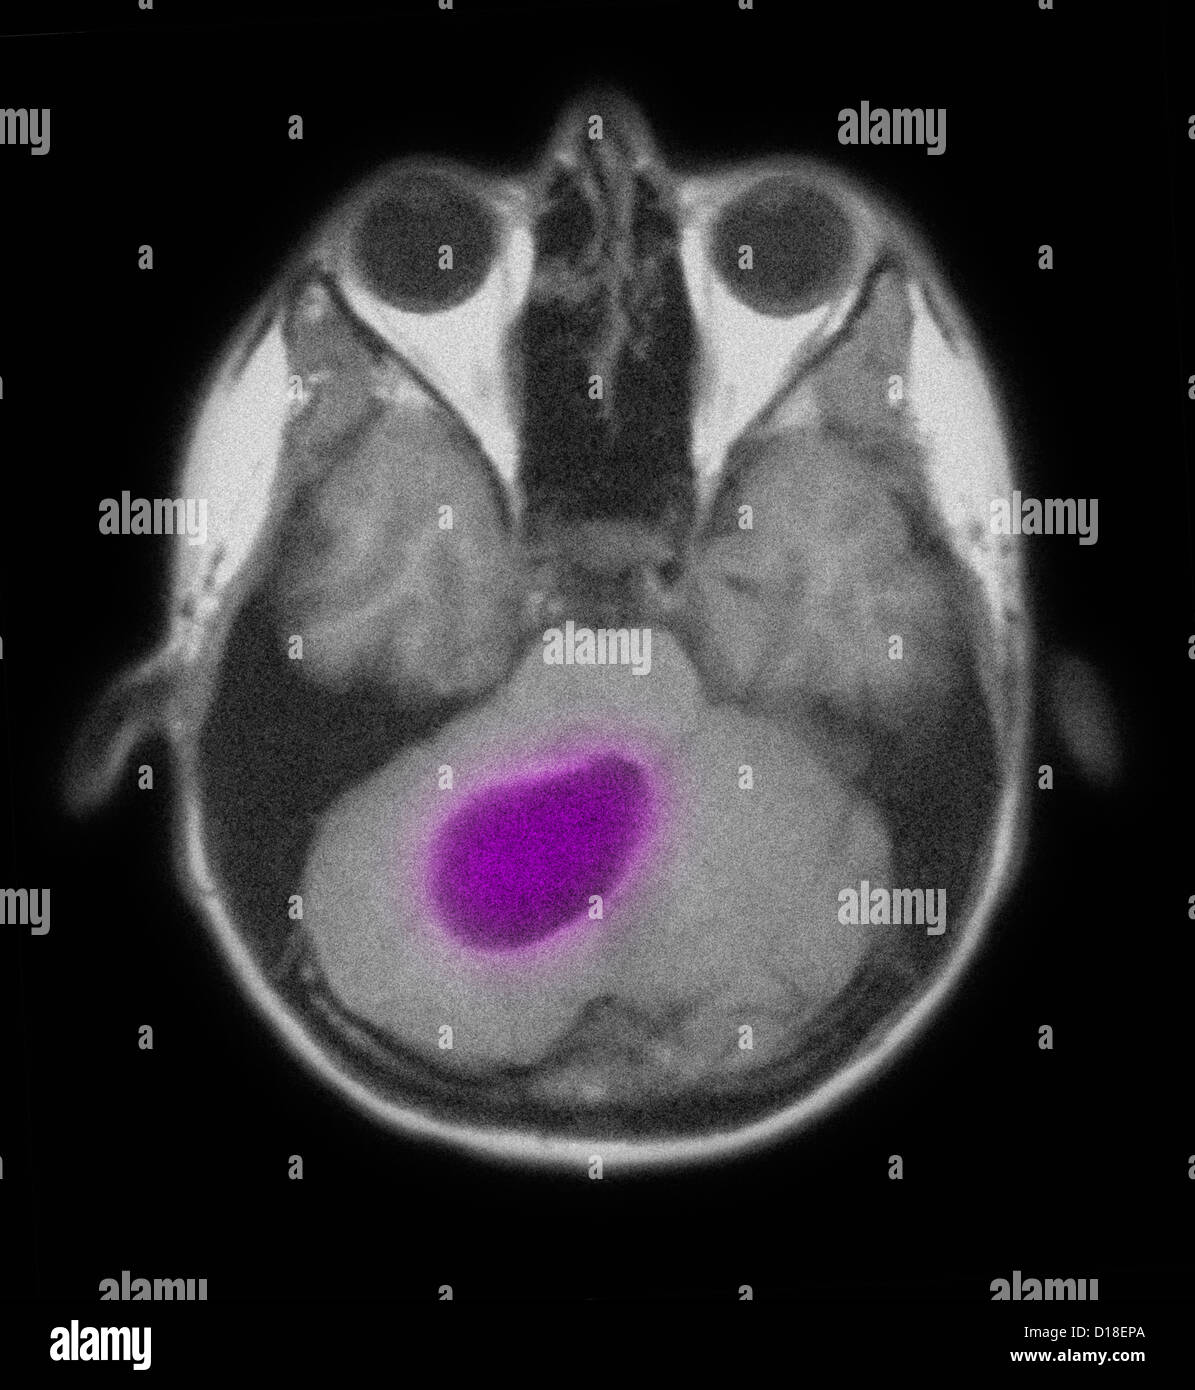 Mri Of The Brain Showing An Astrocytoma Tumor Stock Photo Alamy